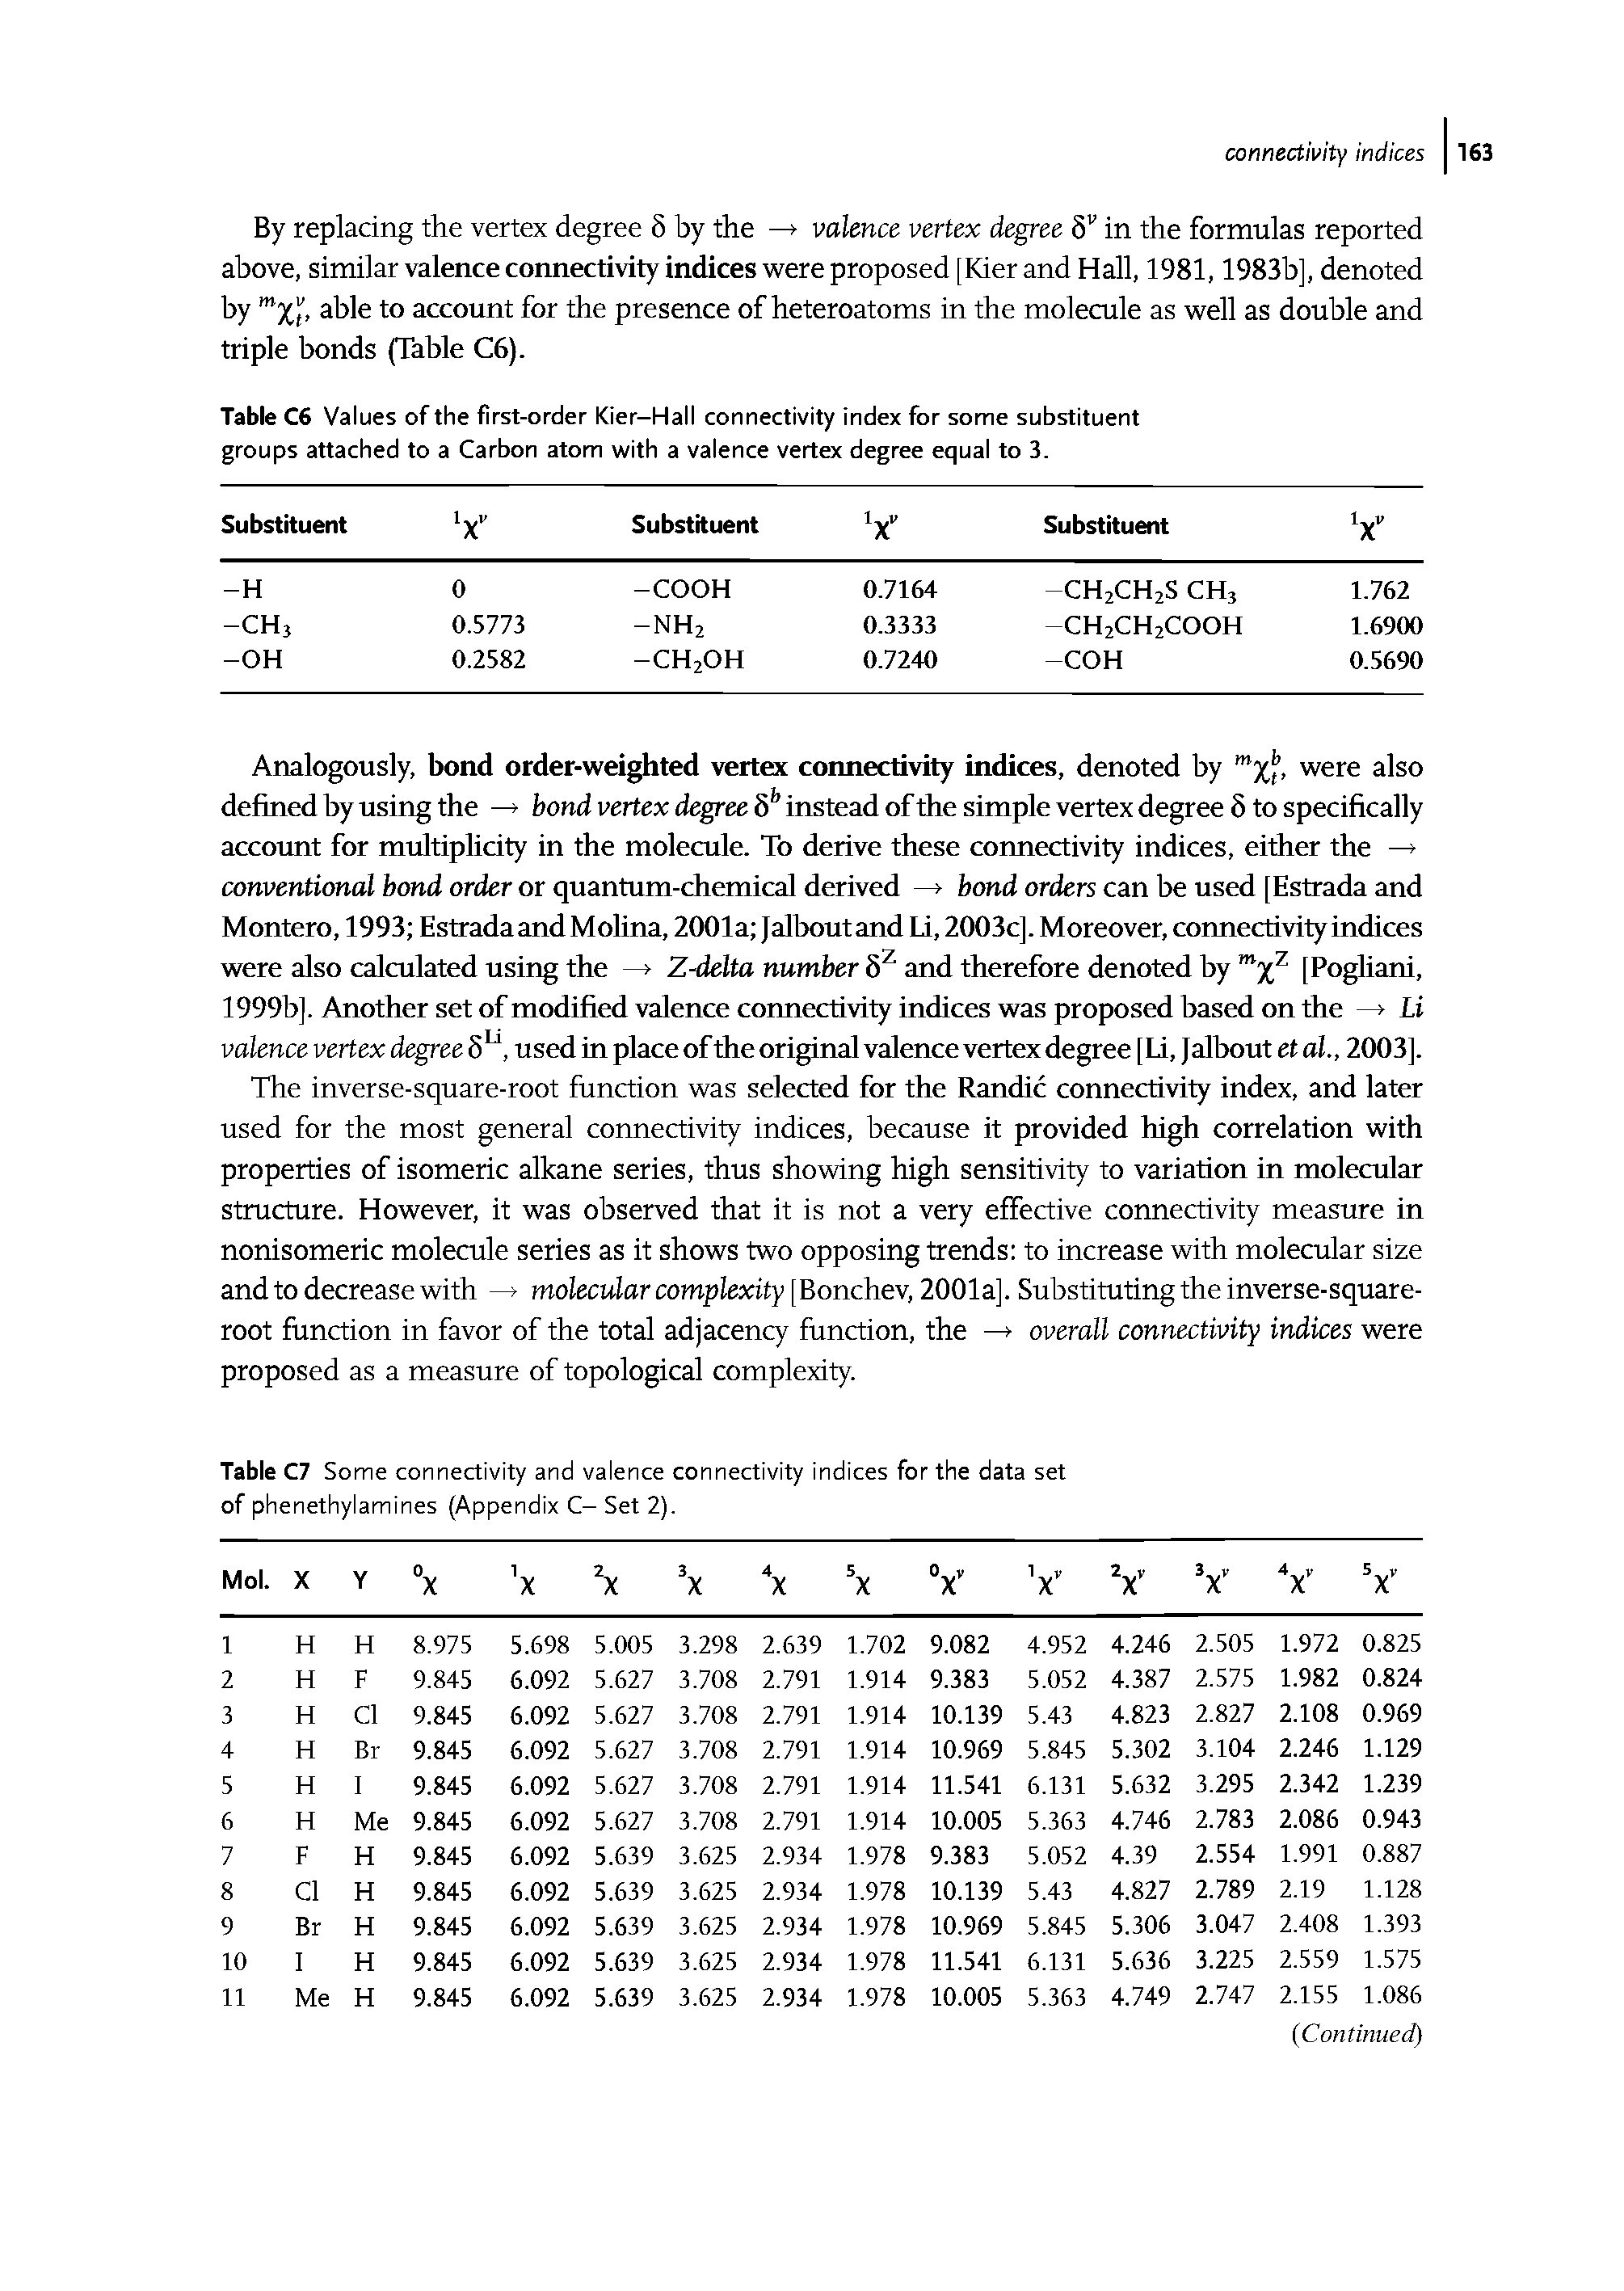 Table C6 Values of the first-order Kier-Hall connectivity index for some substituent groups attached to a Carbon atom with a valence vertex degree equal to 3.